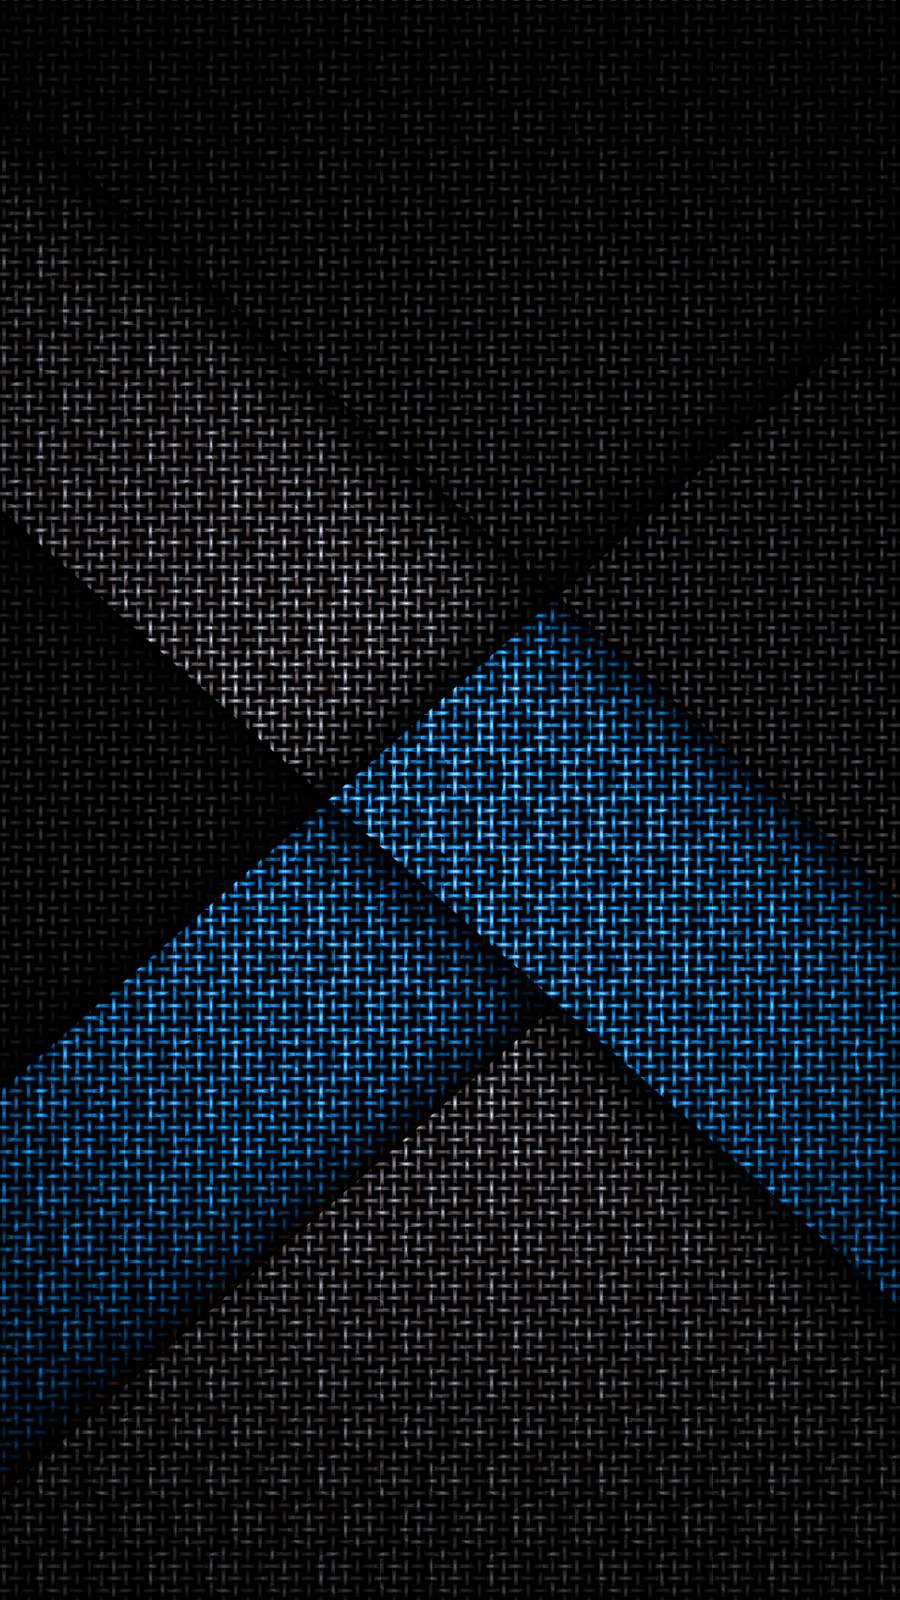 Abstract Texture IPhone Wallpaper - IPhone Wallpapers : iPhone Wallpapers